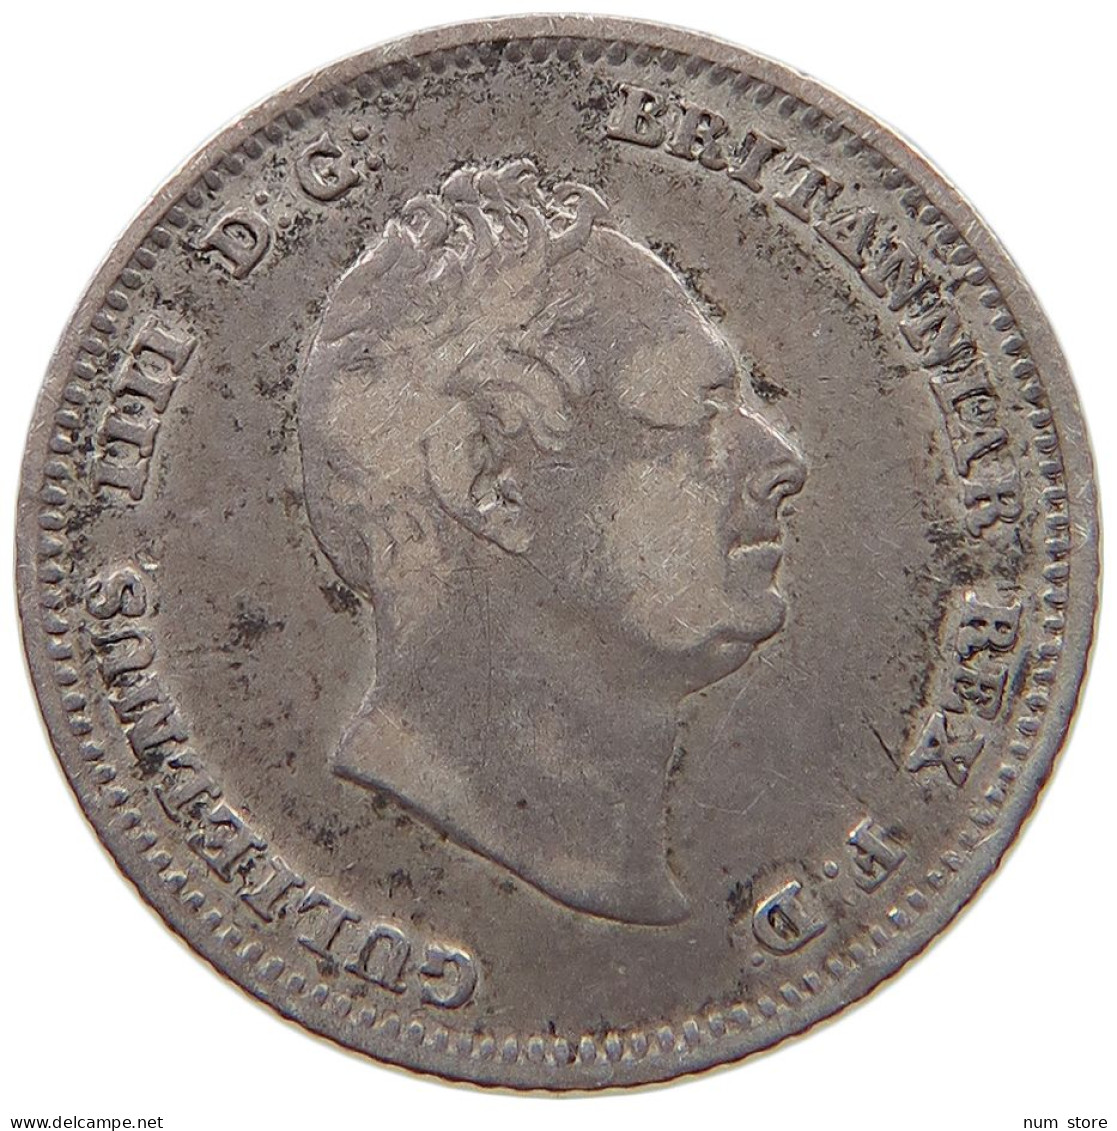 GREAT BRITAIN FOURPENCE 1836 WILLIAM IV. (1830-1837) #t082 0053 - G. 4 Pence/ Groat